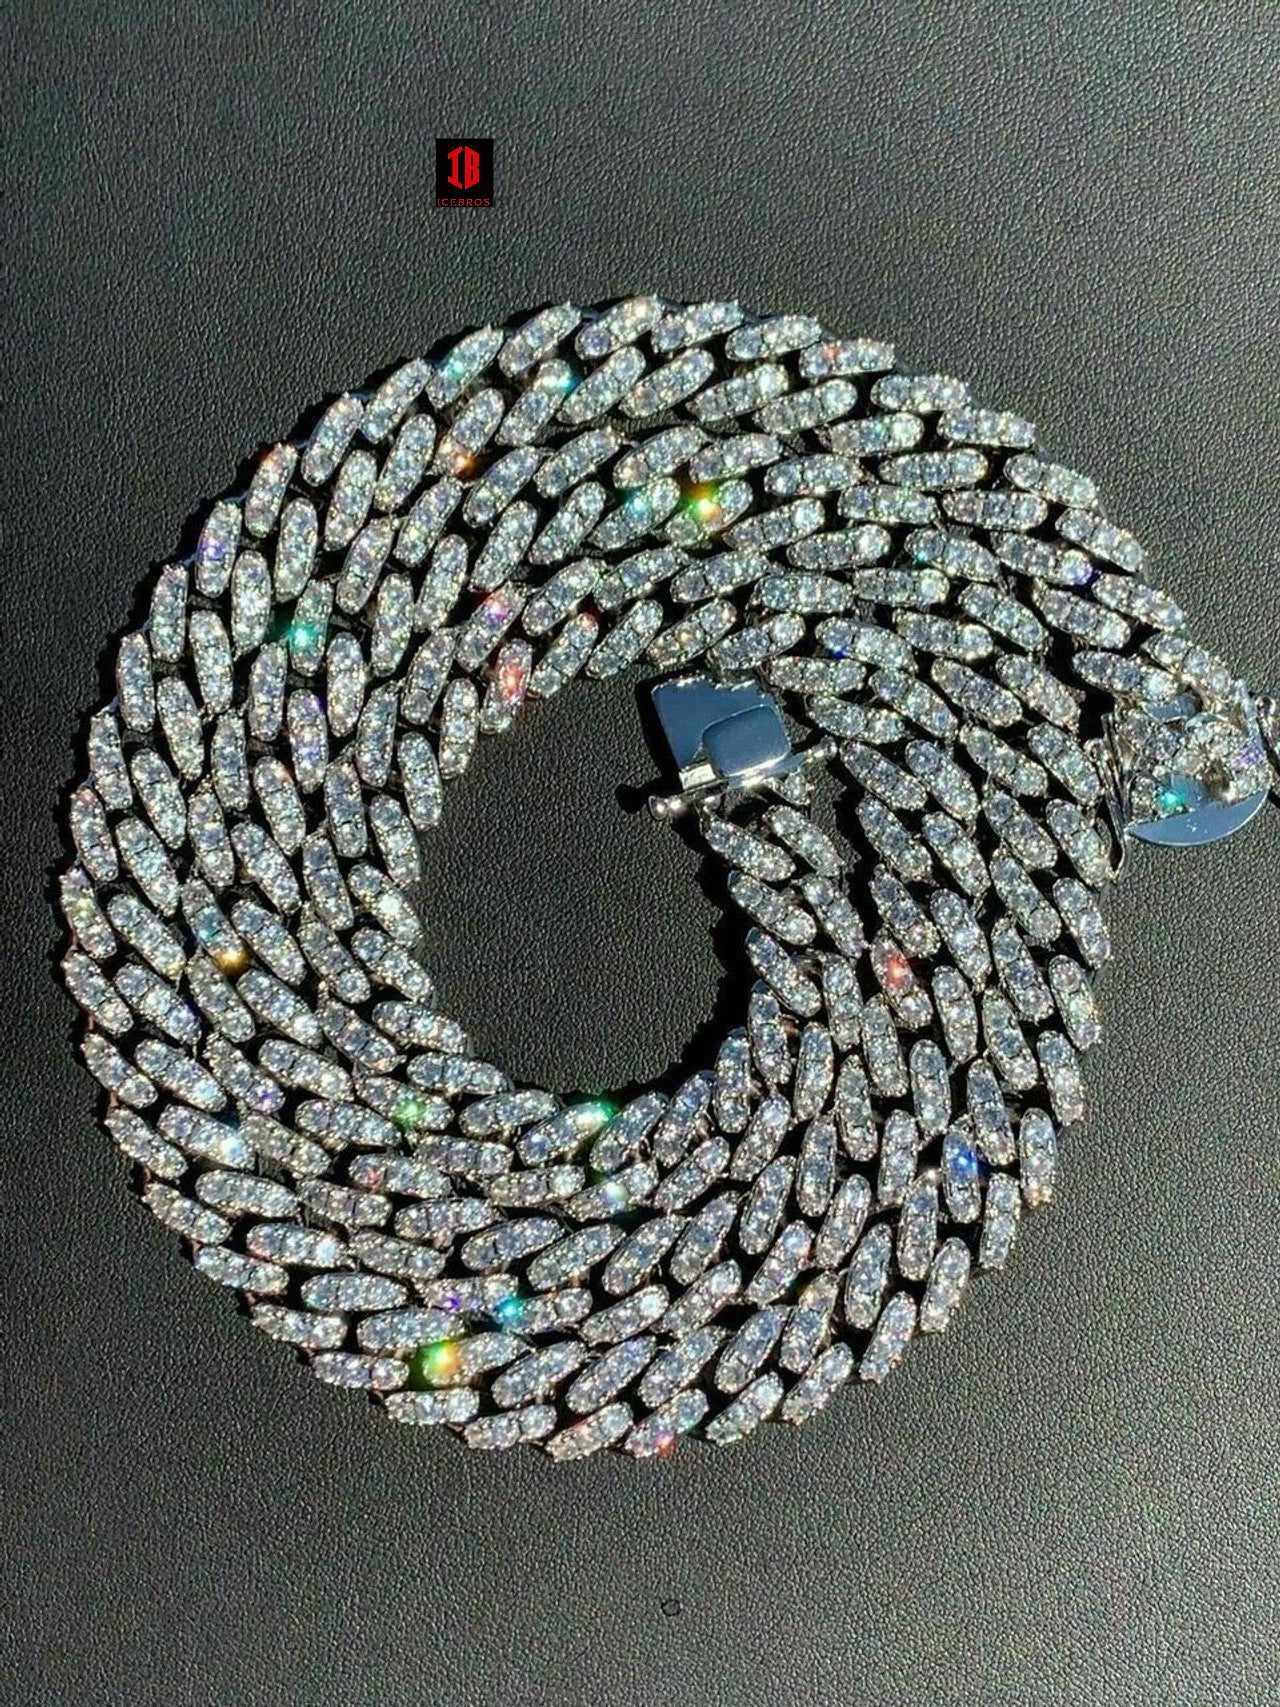 WHITE GOLD Real Mens Miami Cuban Chain Solid 925 Silver Iced Necklace VERY HEAVY Link 12mm